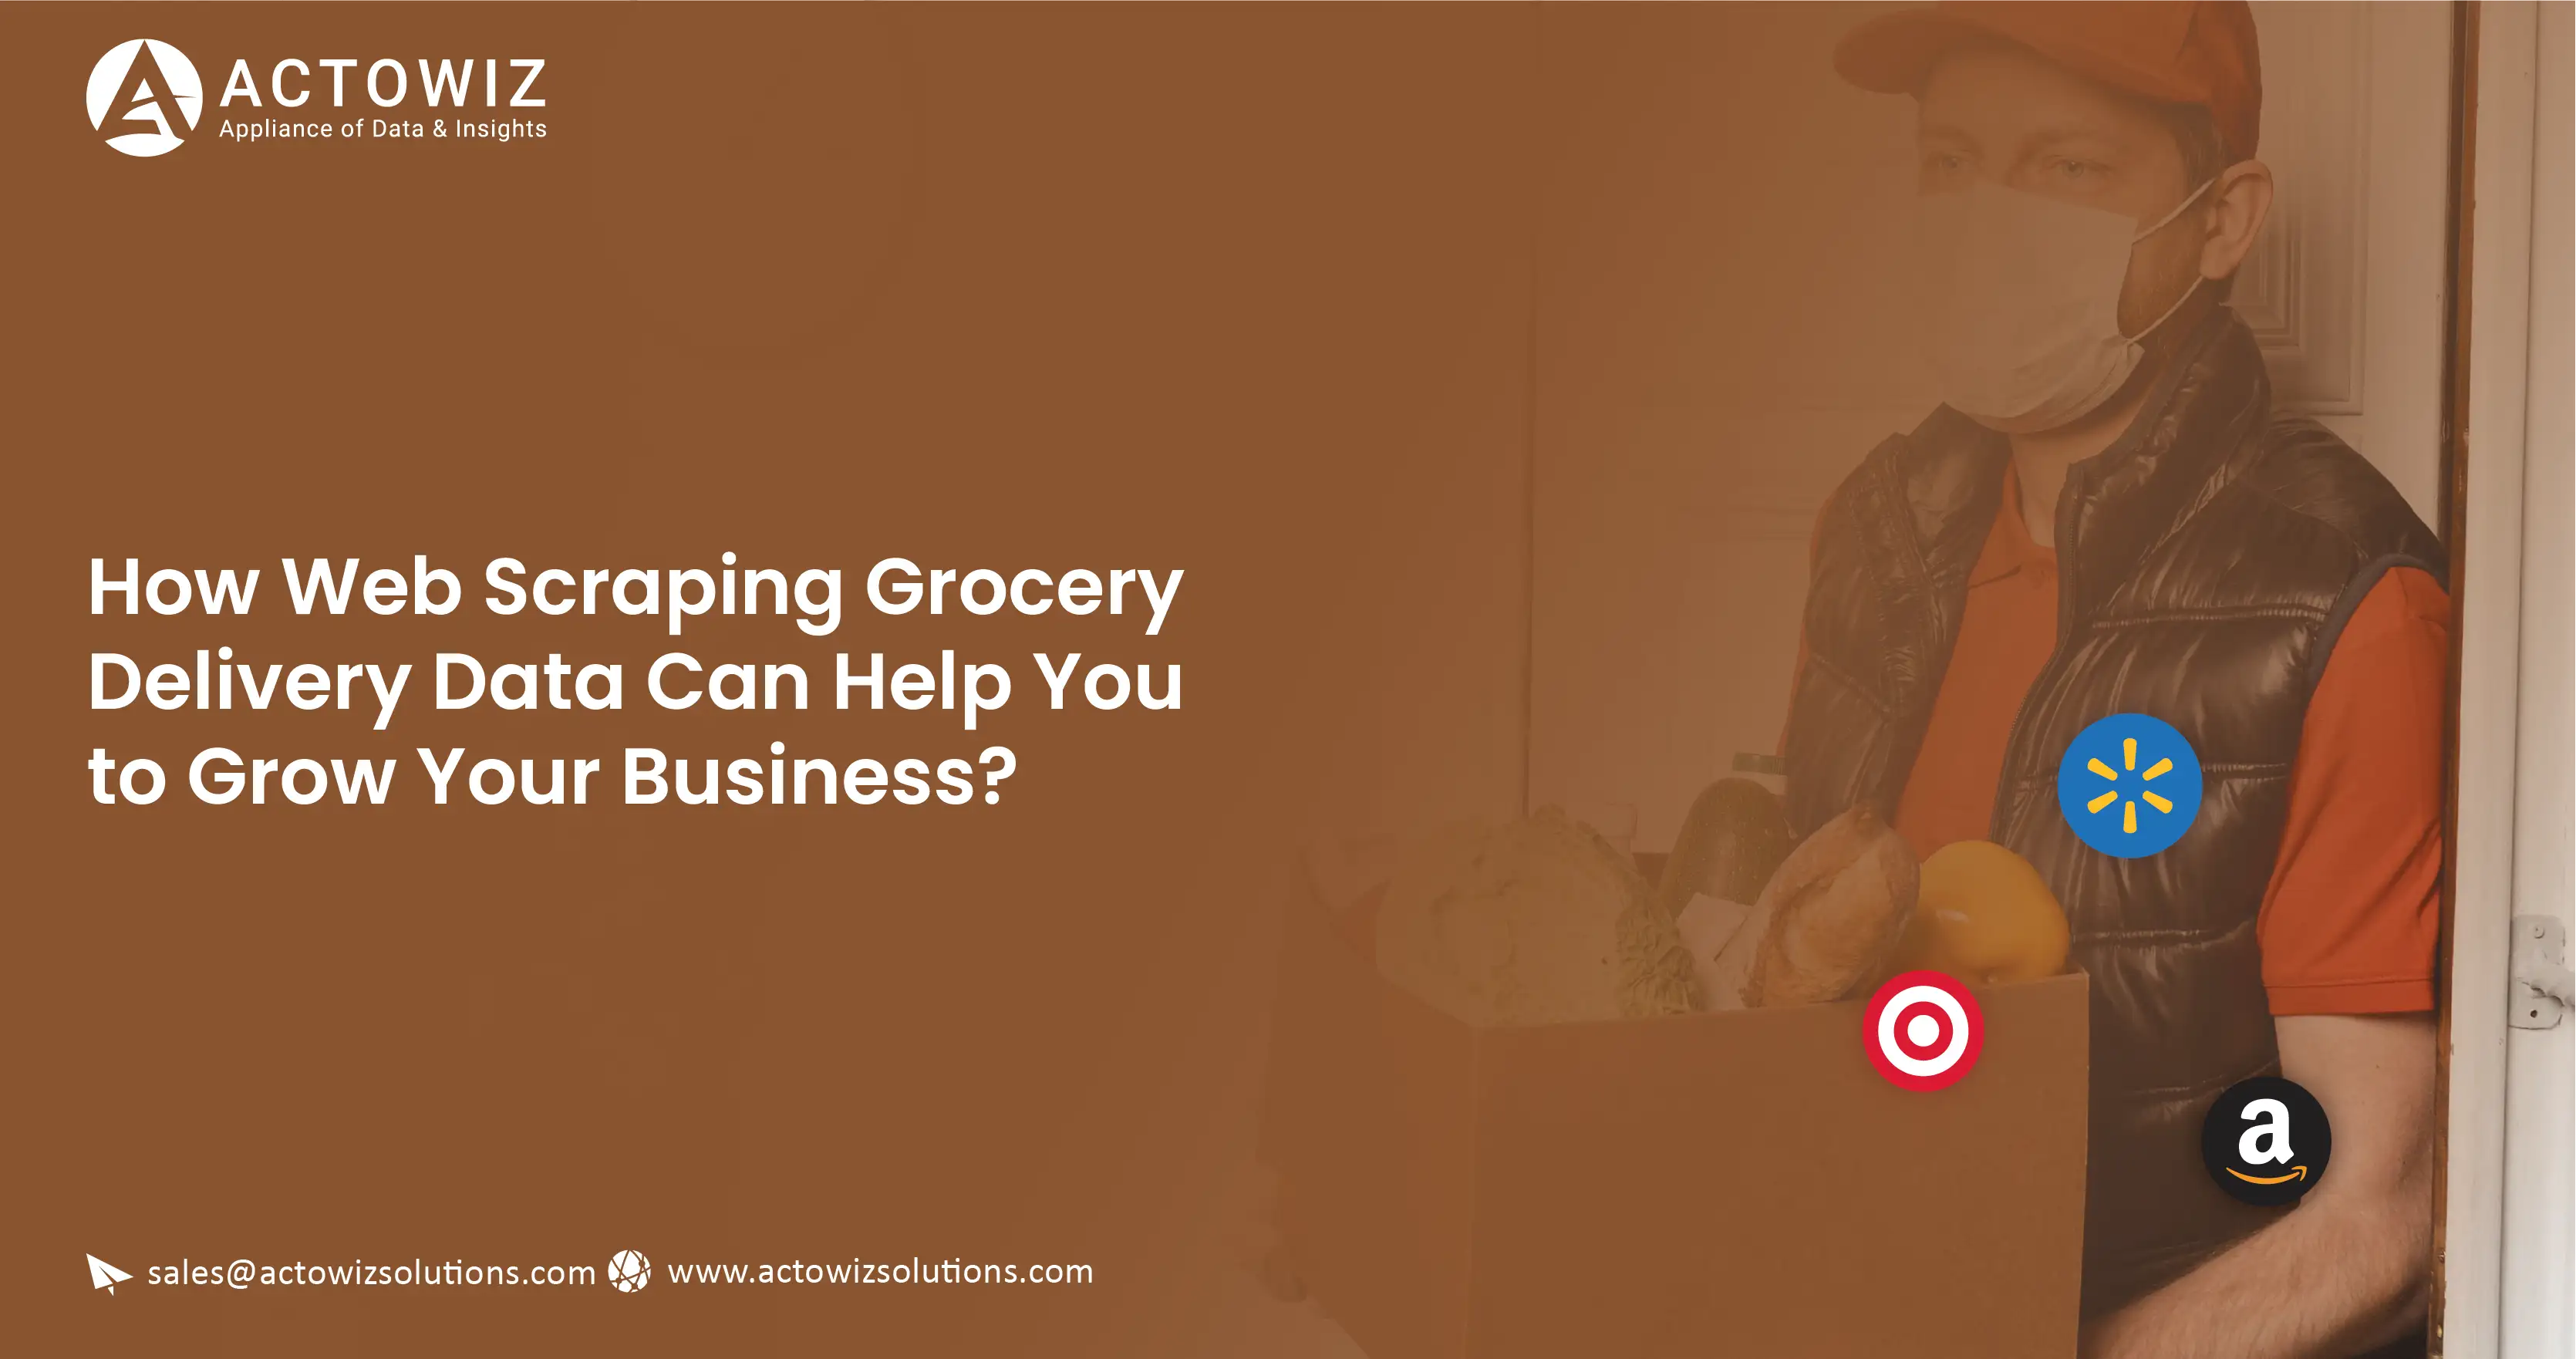 How-Web-Scraping-Grocery-Delivery-Data-Can-Help-You-to-01